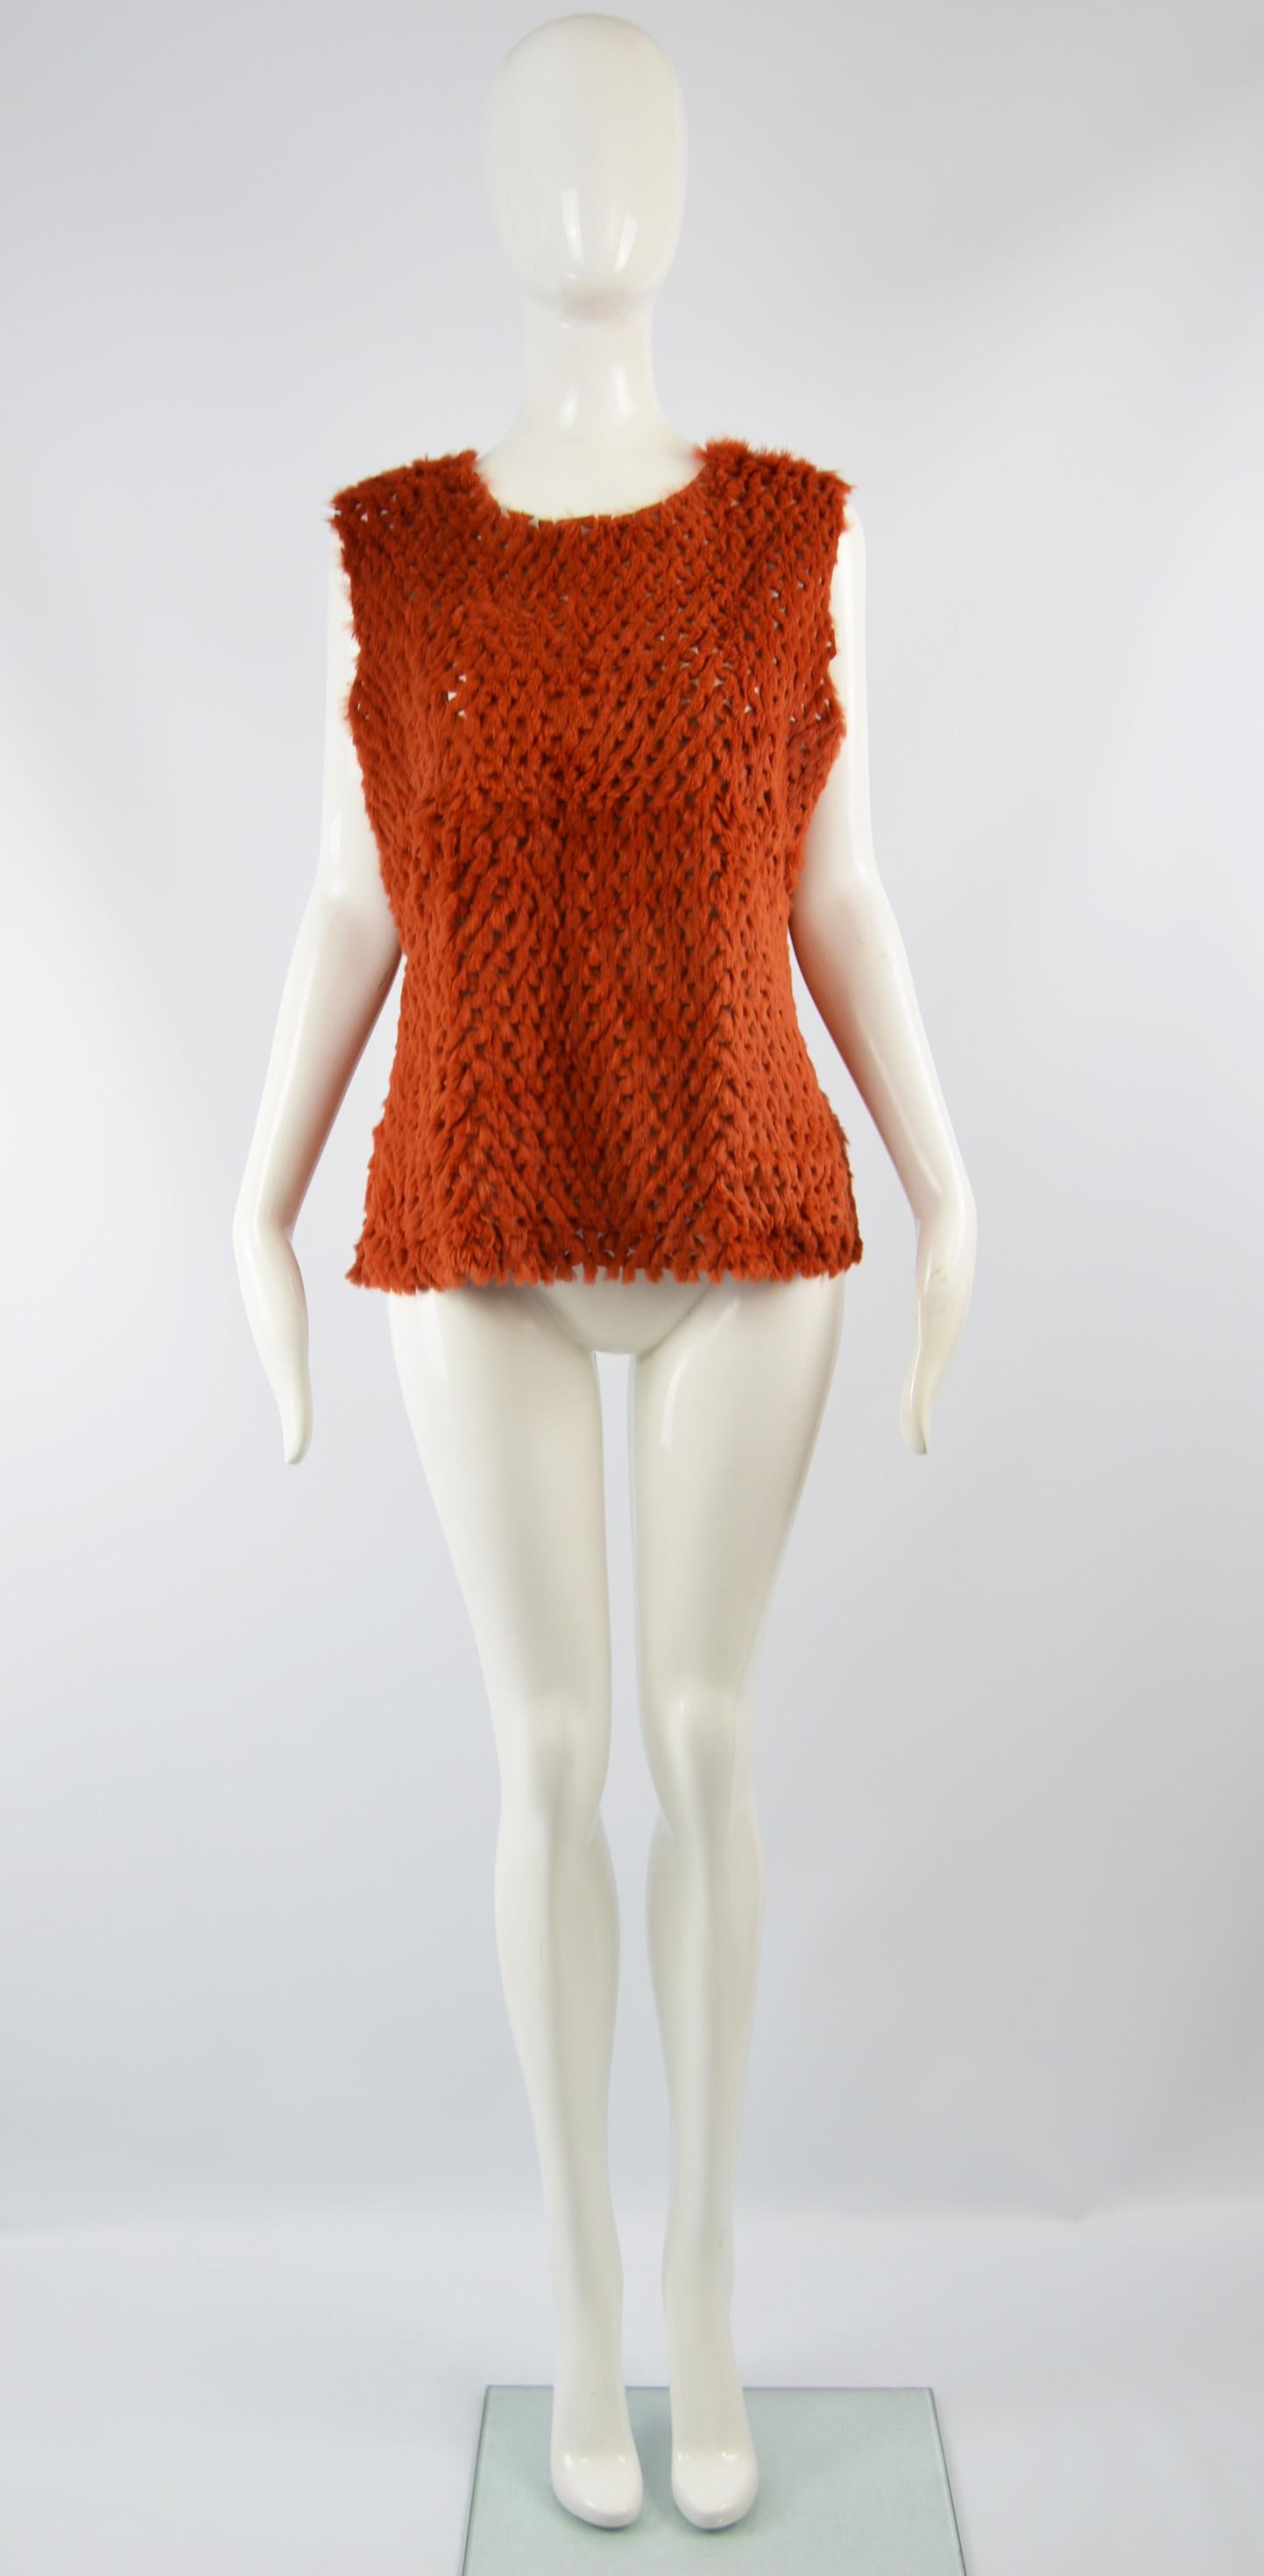 A fabulous vintage women's tank top / sleeveless sweater by luxury Italian fashion designer, Gianfranco Ferre. In a burnt orange rabbit / coney fur with intricate cut outs and a jersey back. Perfect for layering in the day or dressing up in the